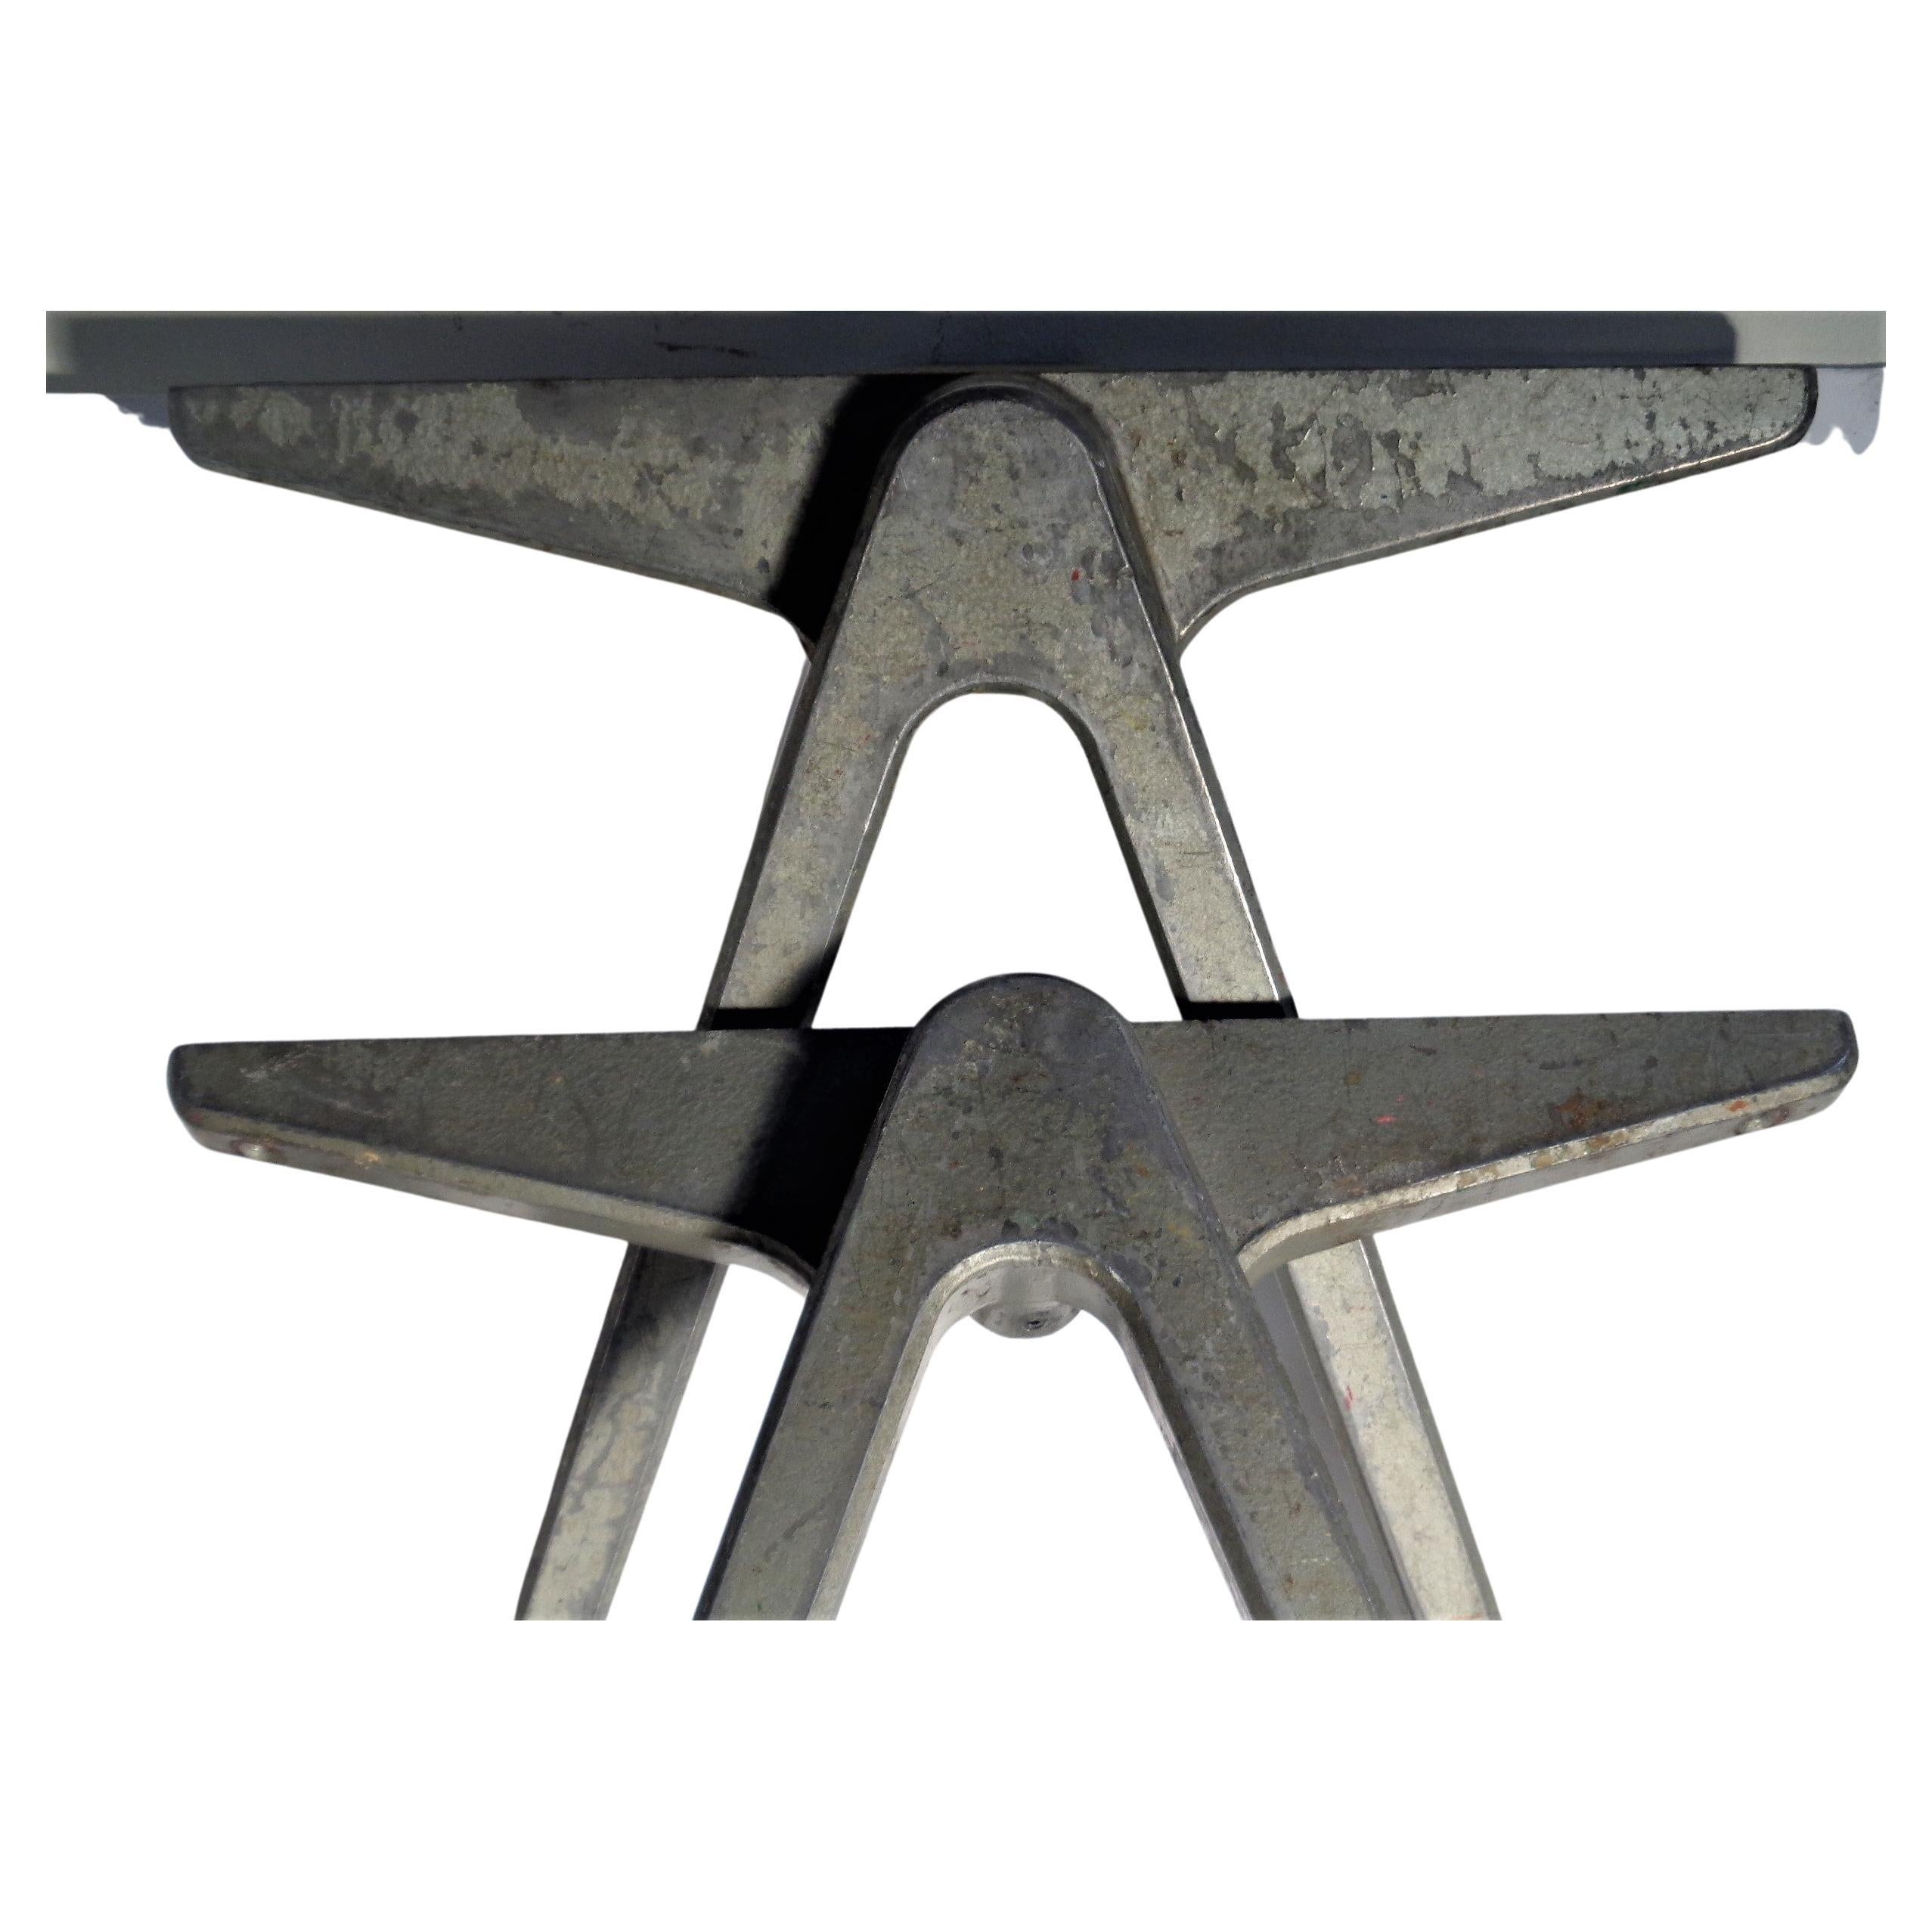 English  Jean Prouve style Aluminum Compass Table Legs by James Leonard for Esavian 